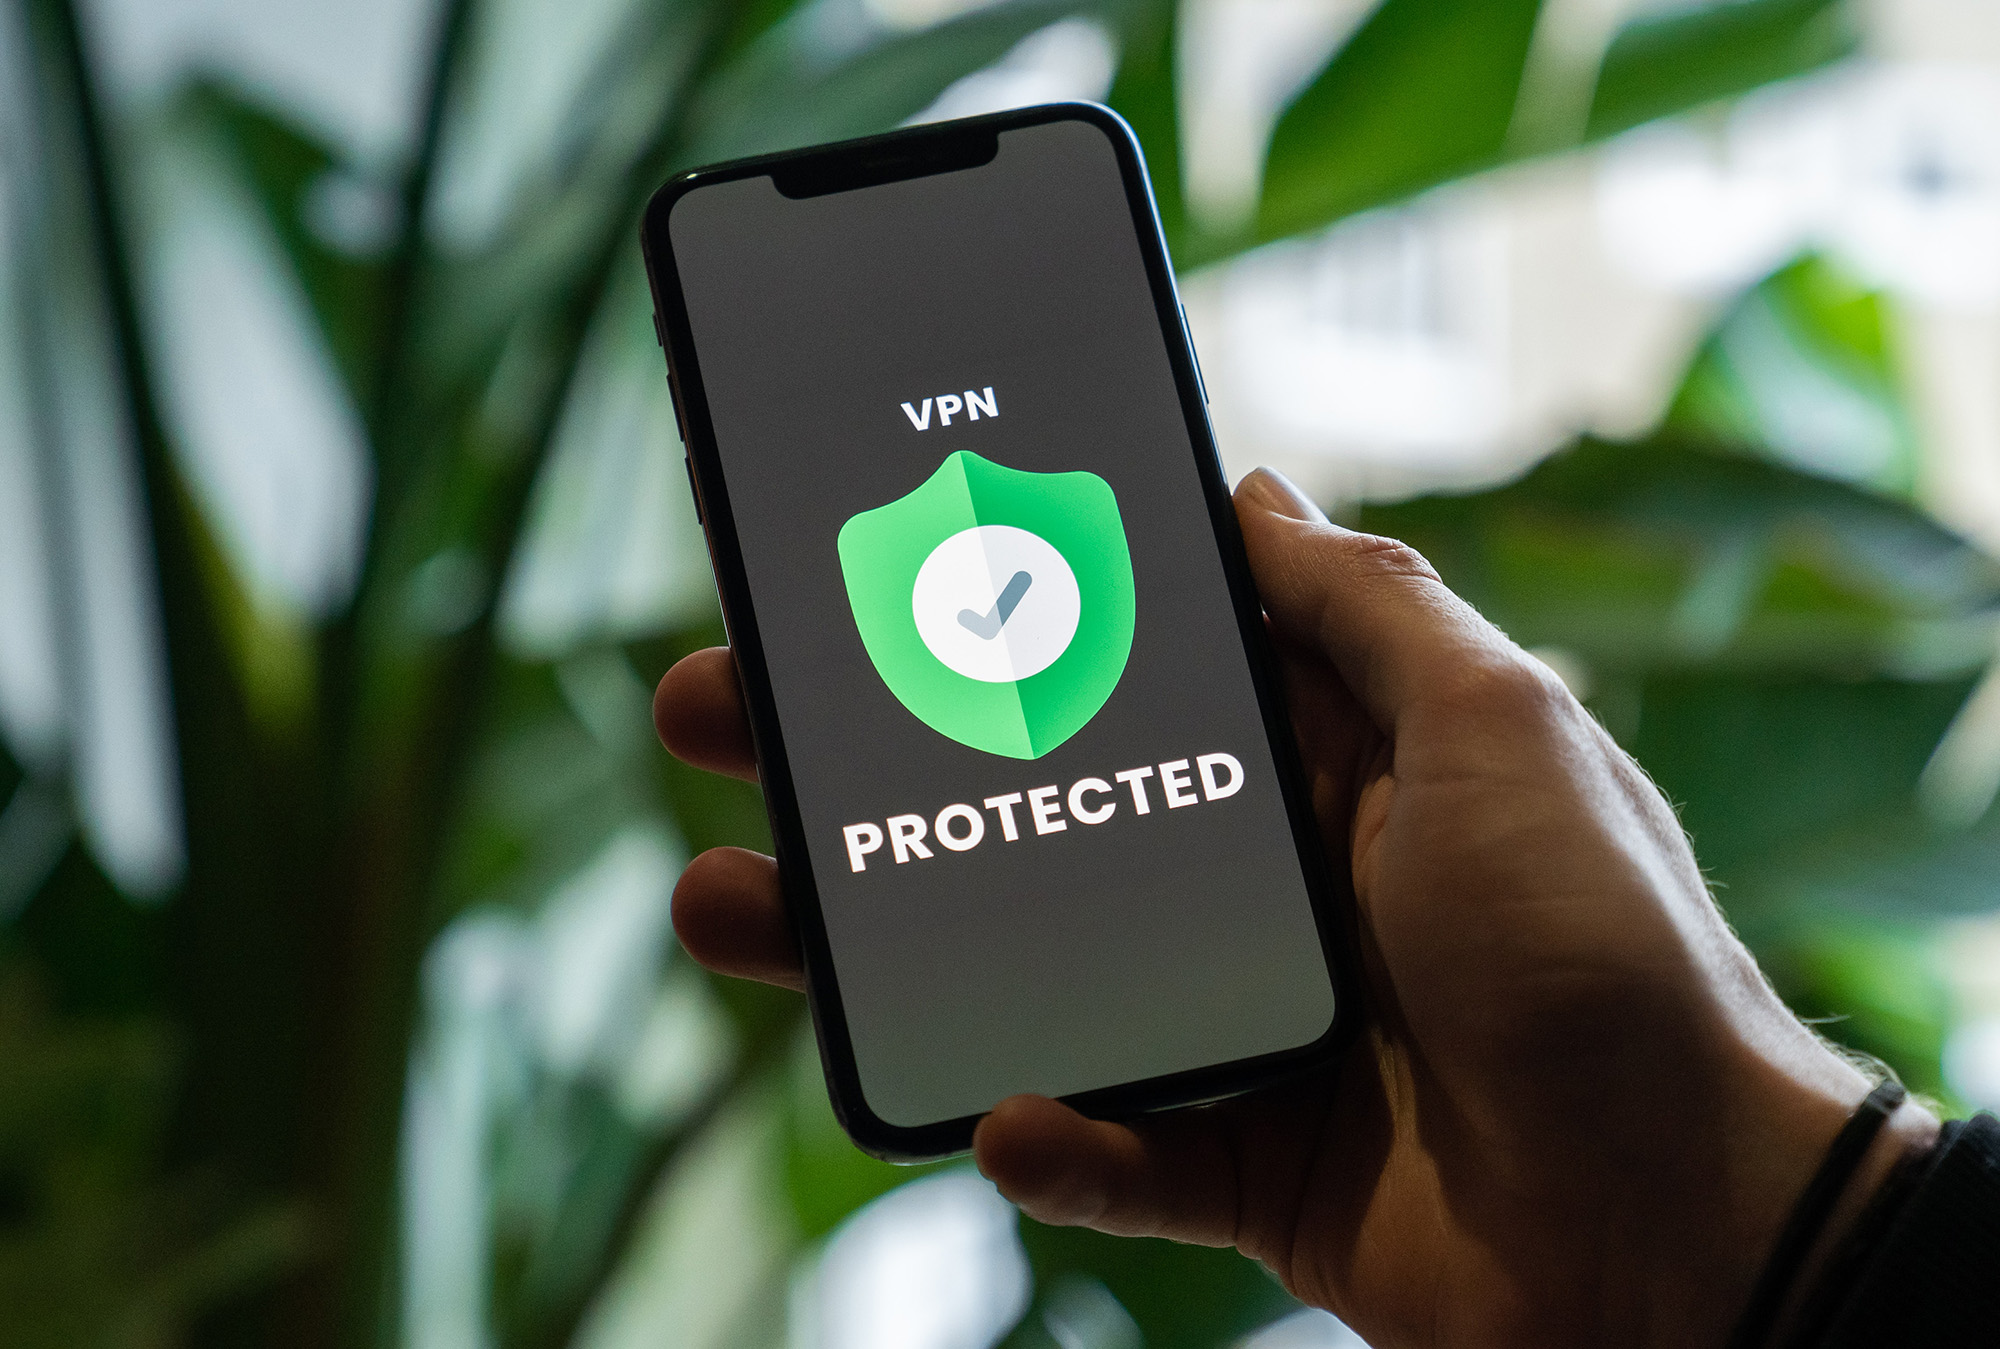 Male holding a cellphone with the words VPN Protected on it